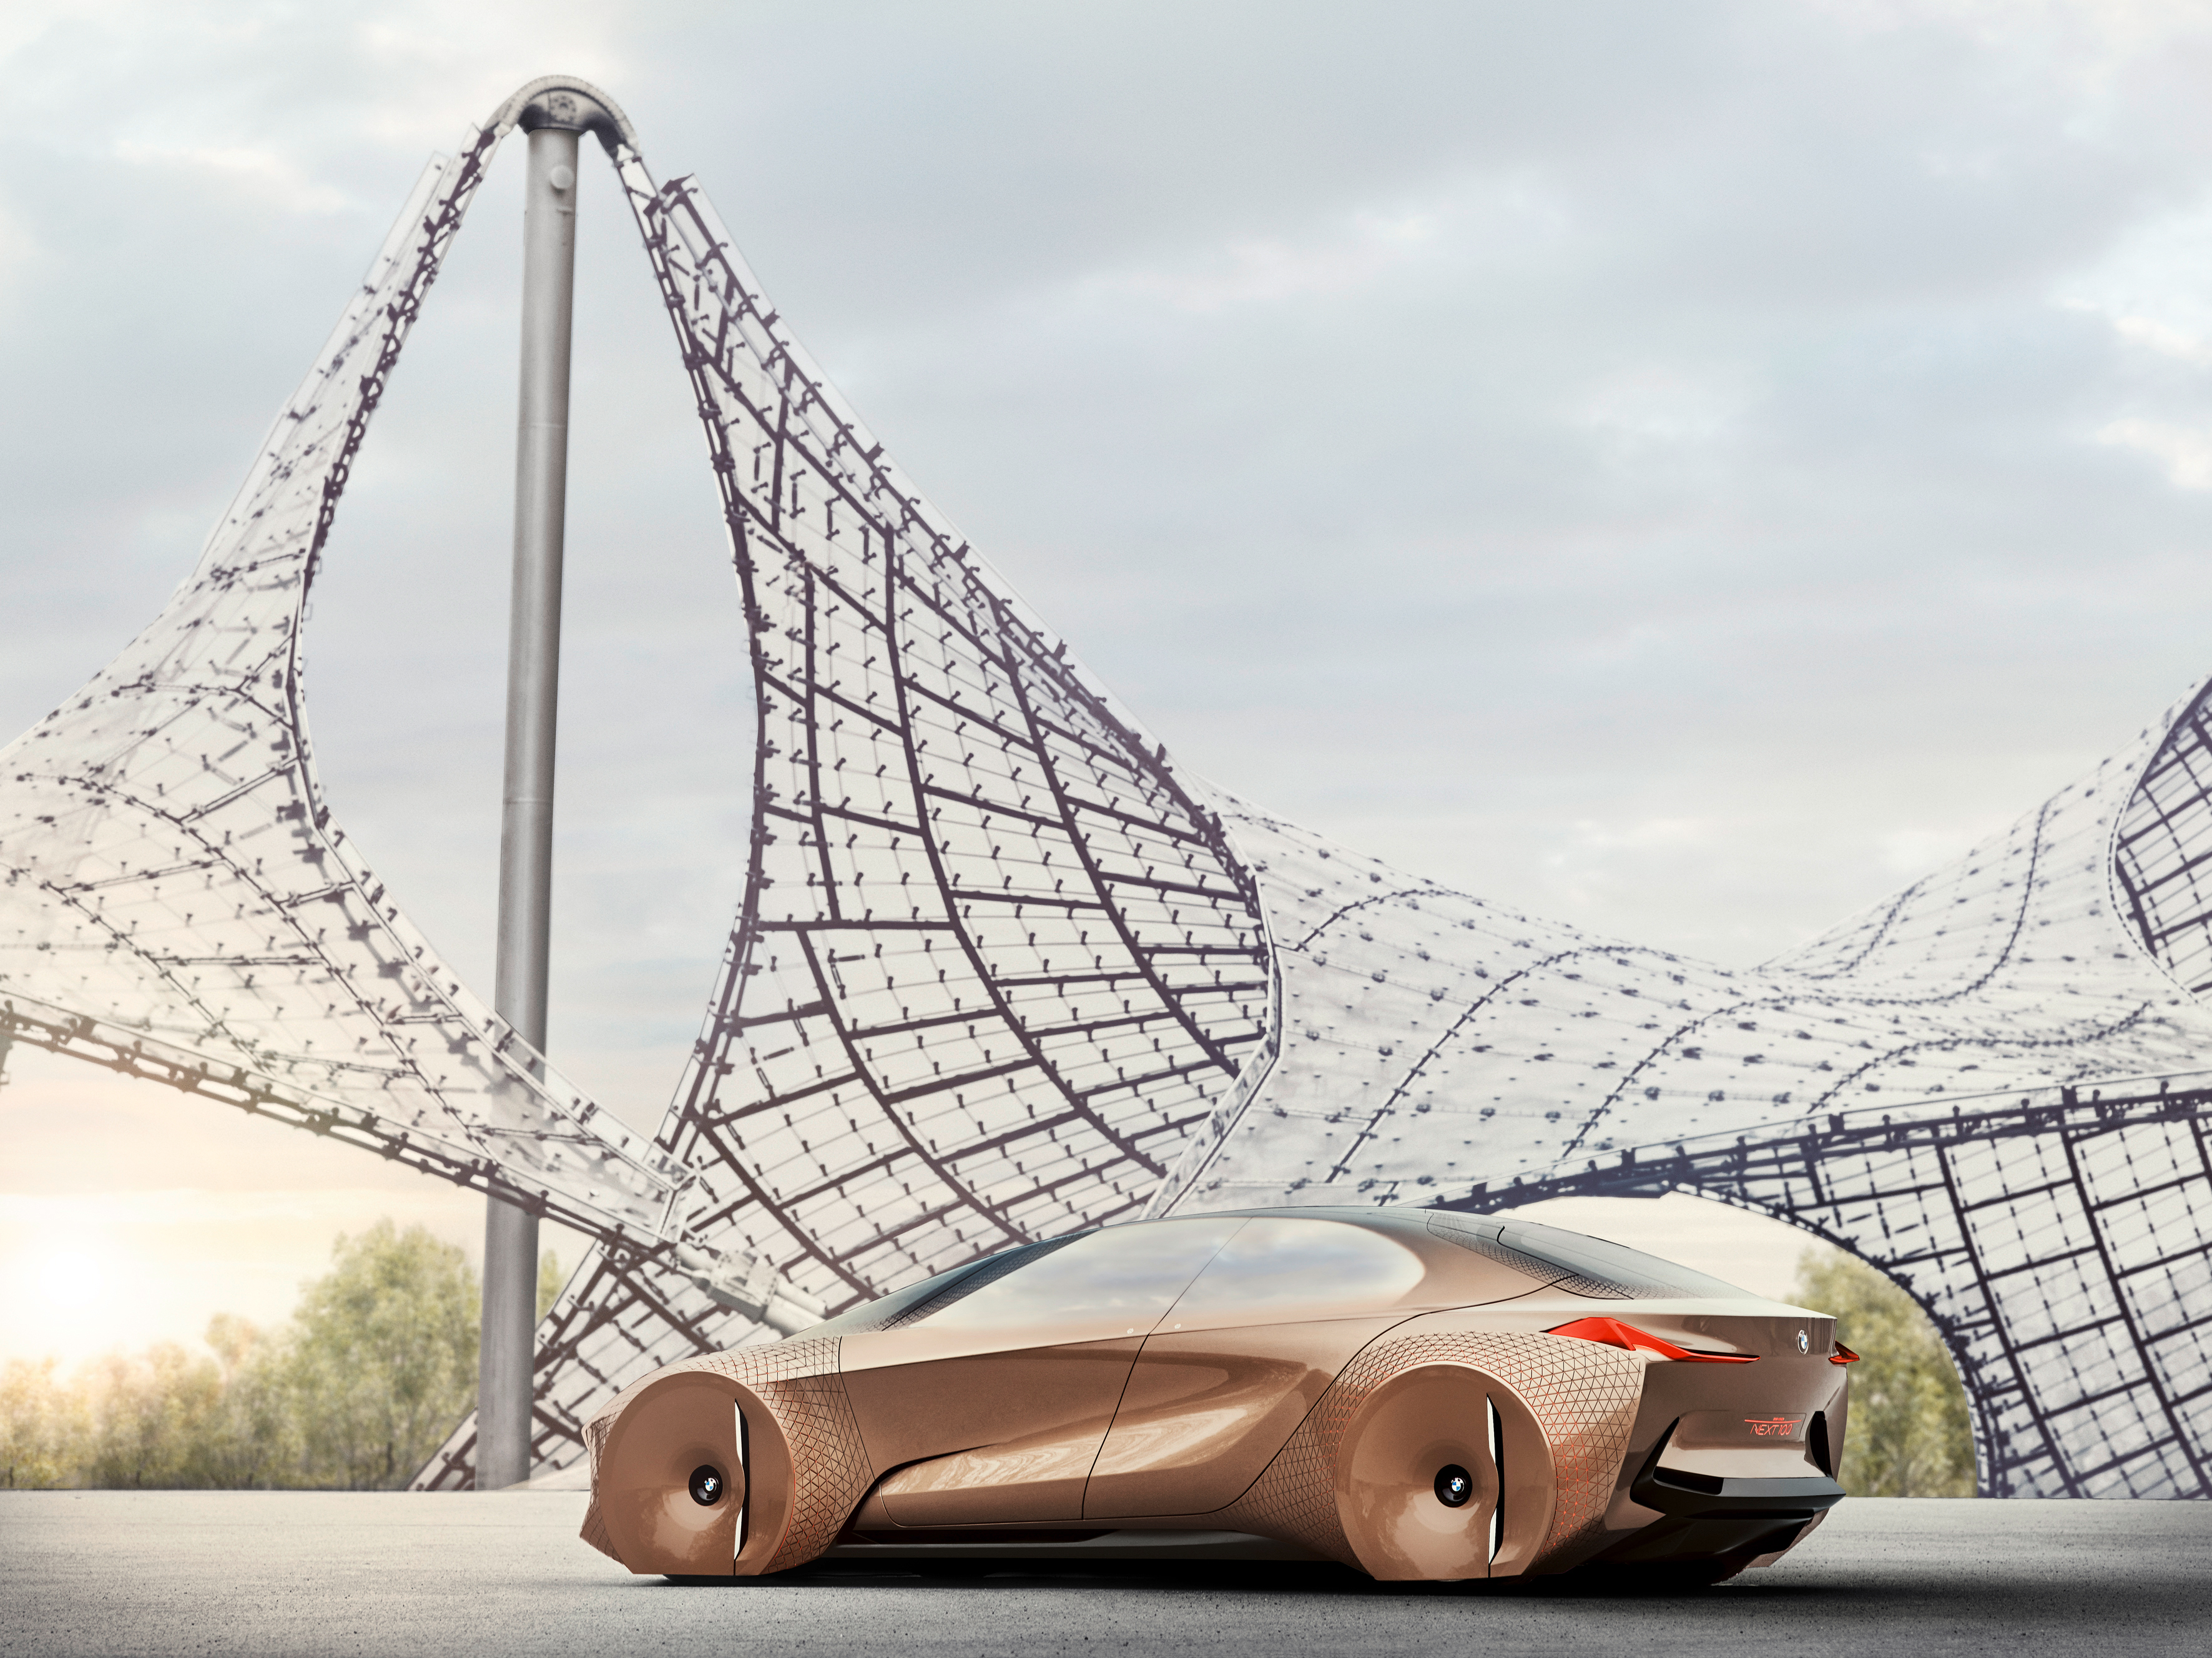 Vehicles BMW Vision Next 100 HD Wallpaper | Background Image